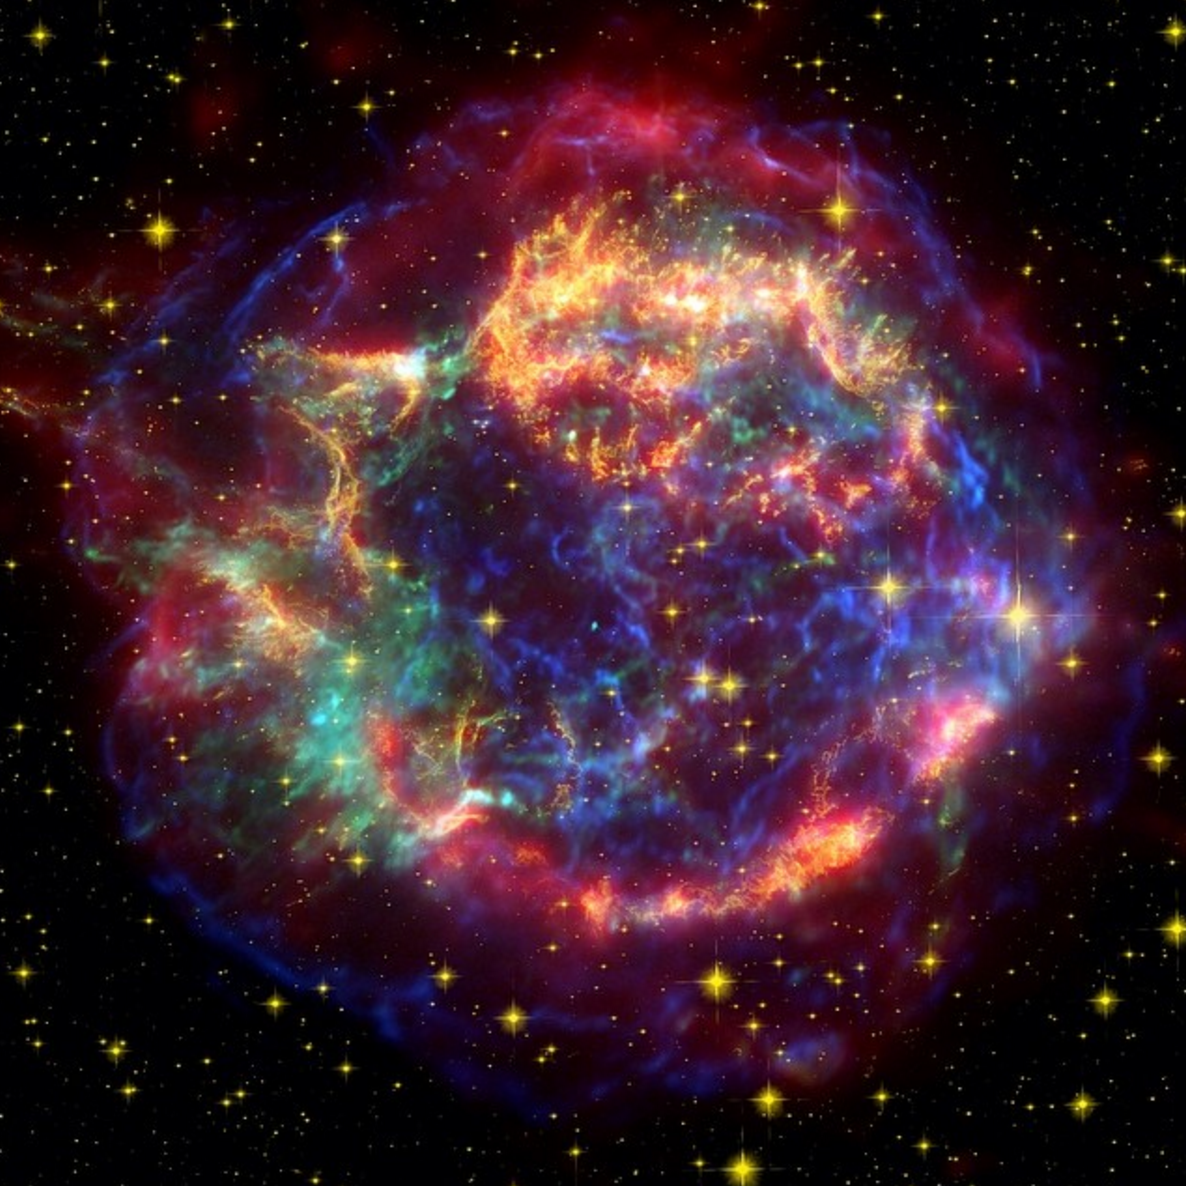 A Supernova Might Have Abetted A Mass Extinction On Earth